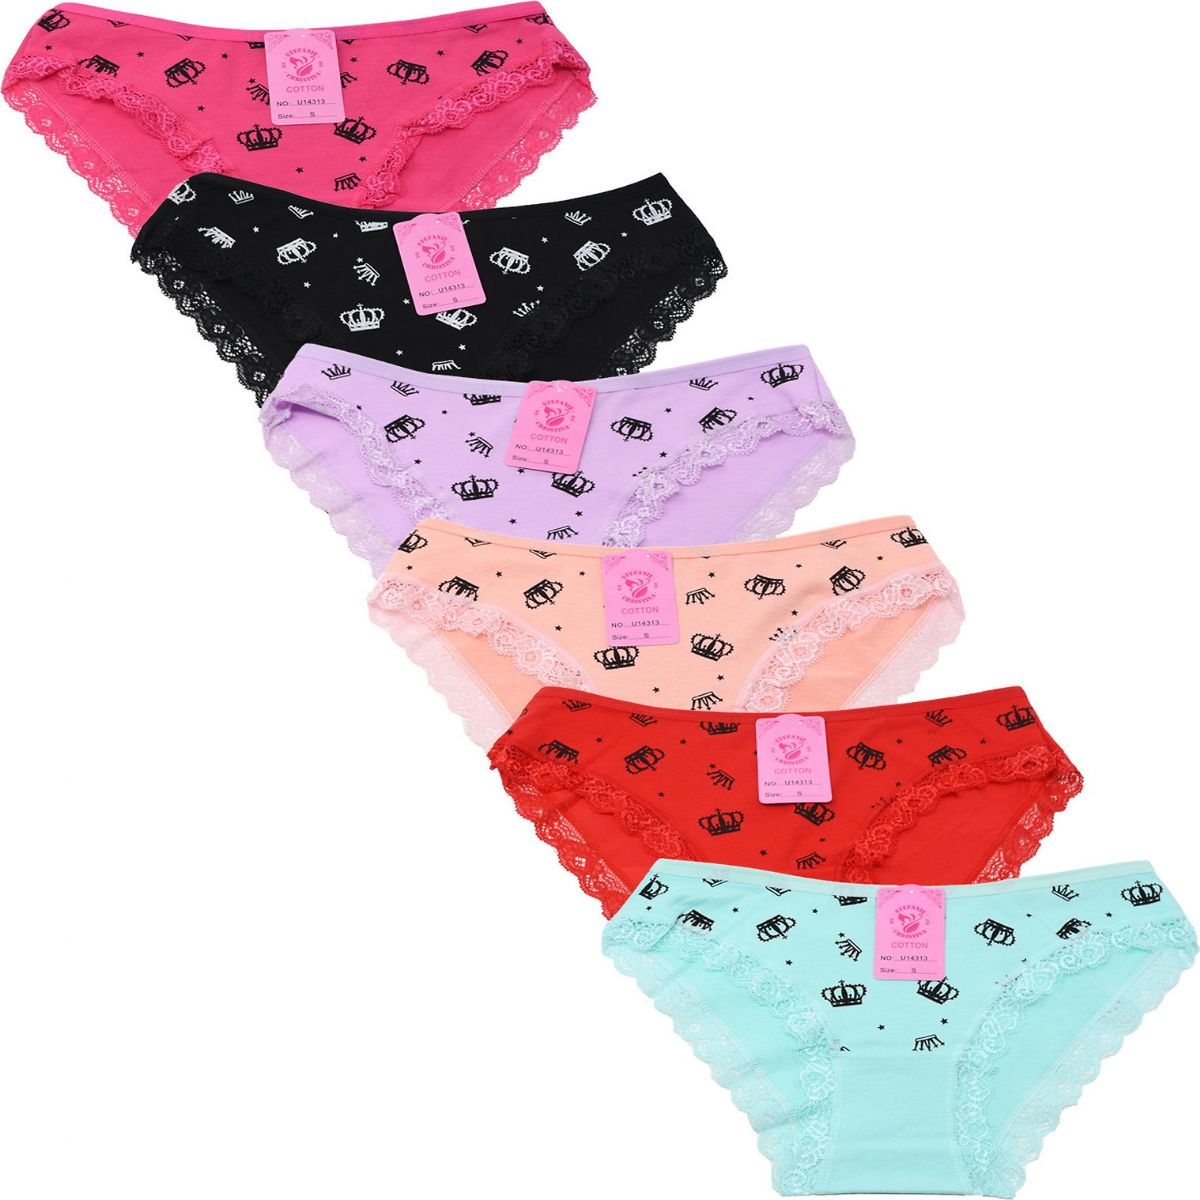 48 Pieces of Cotton Panties Graphic Print In Assorted Colors Medium